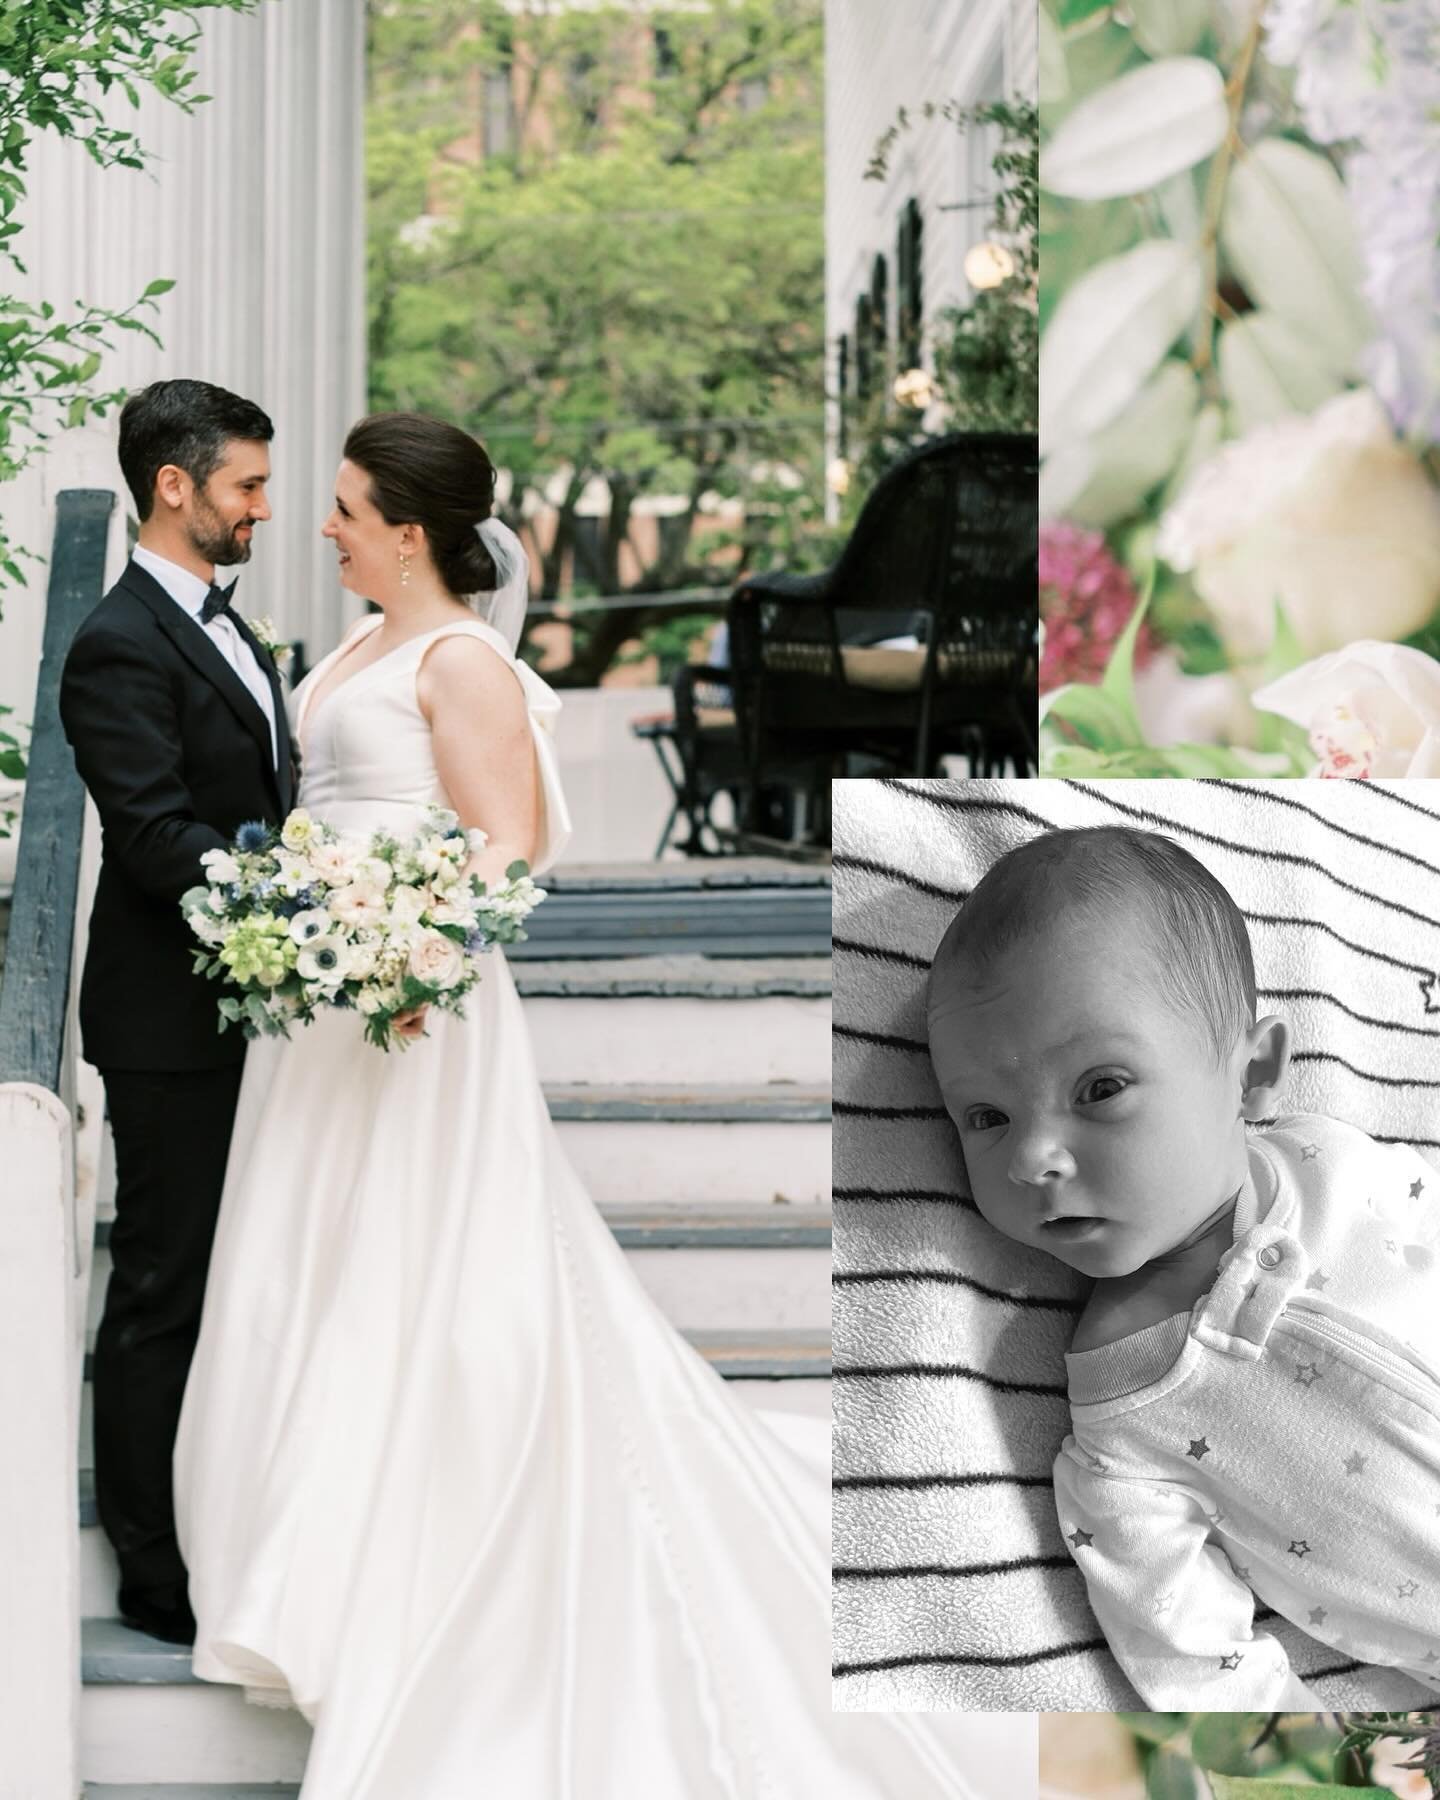 Cheers to three years, @hwthompson! 🥰 And this year the celebration is made even more sweet with the addition of someone special....
Our littlest love, George Felix, was born a month (!!) ago today, March 10th. Our hearts have never been so full. 🩵